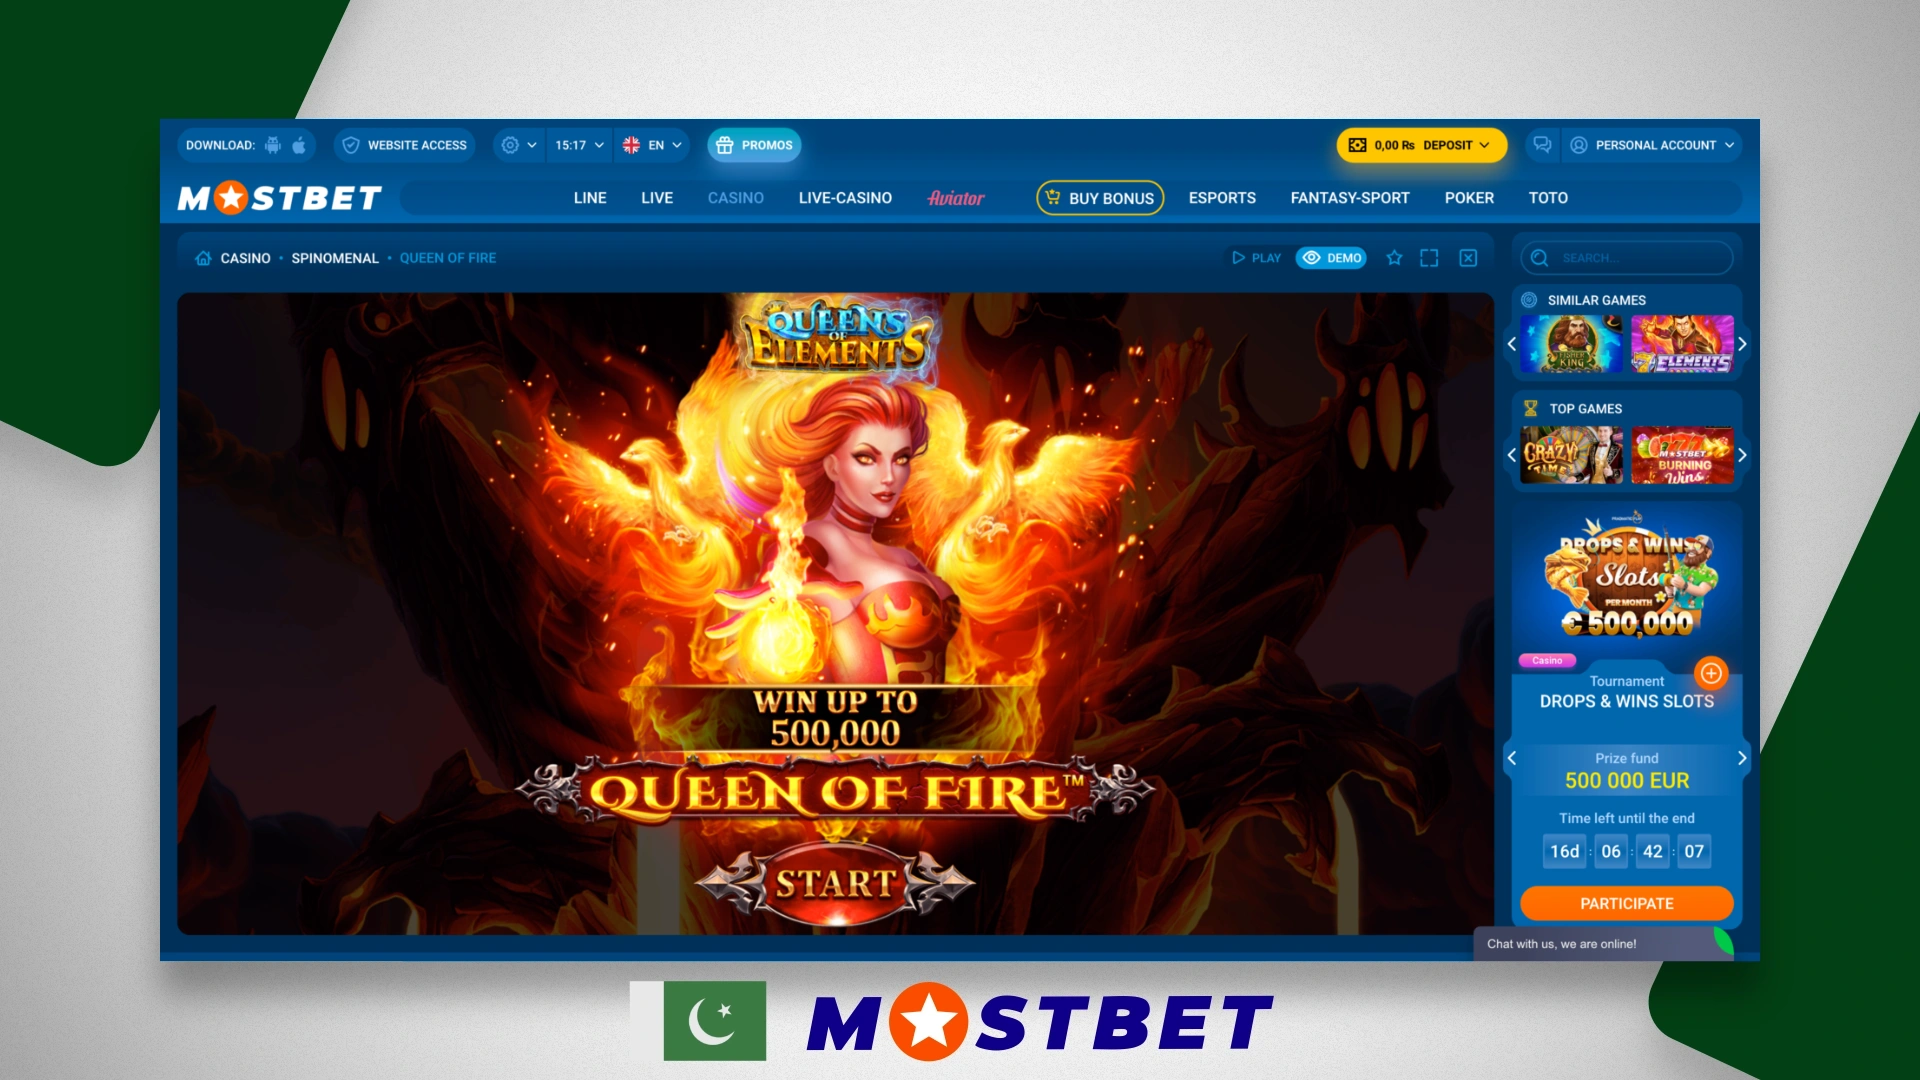 Queen of fire game at Mostbet Pakistan